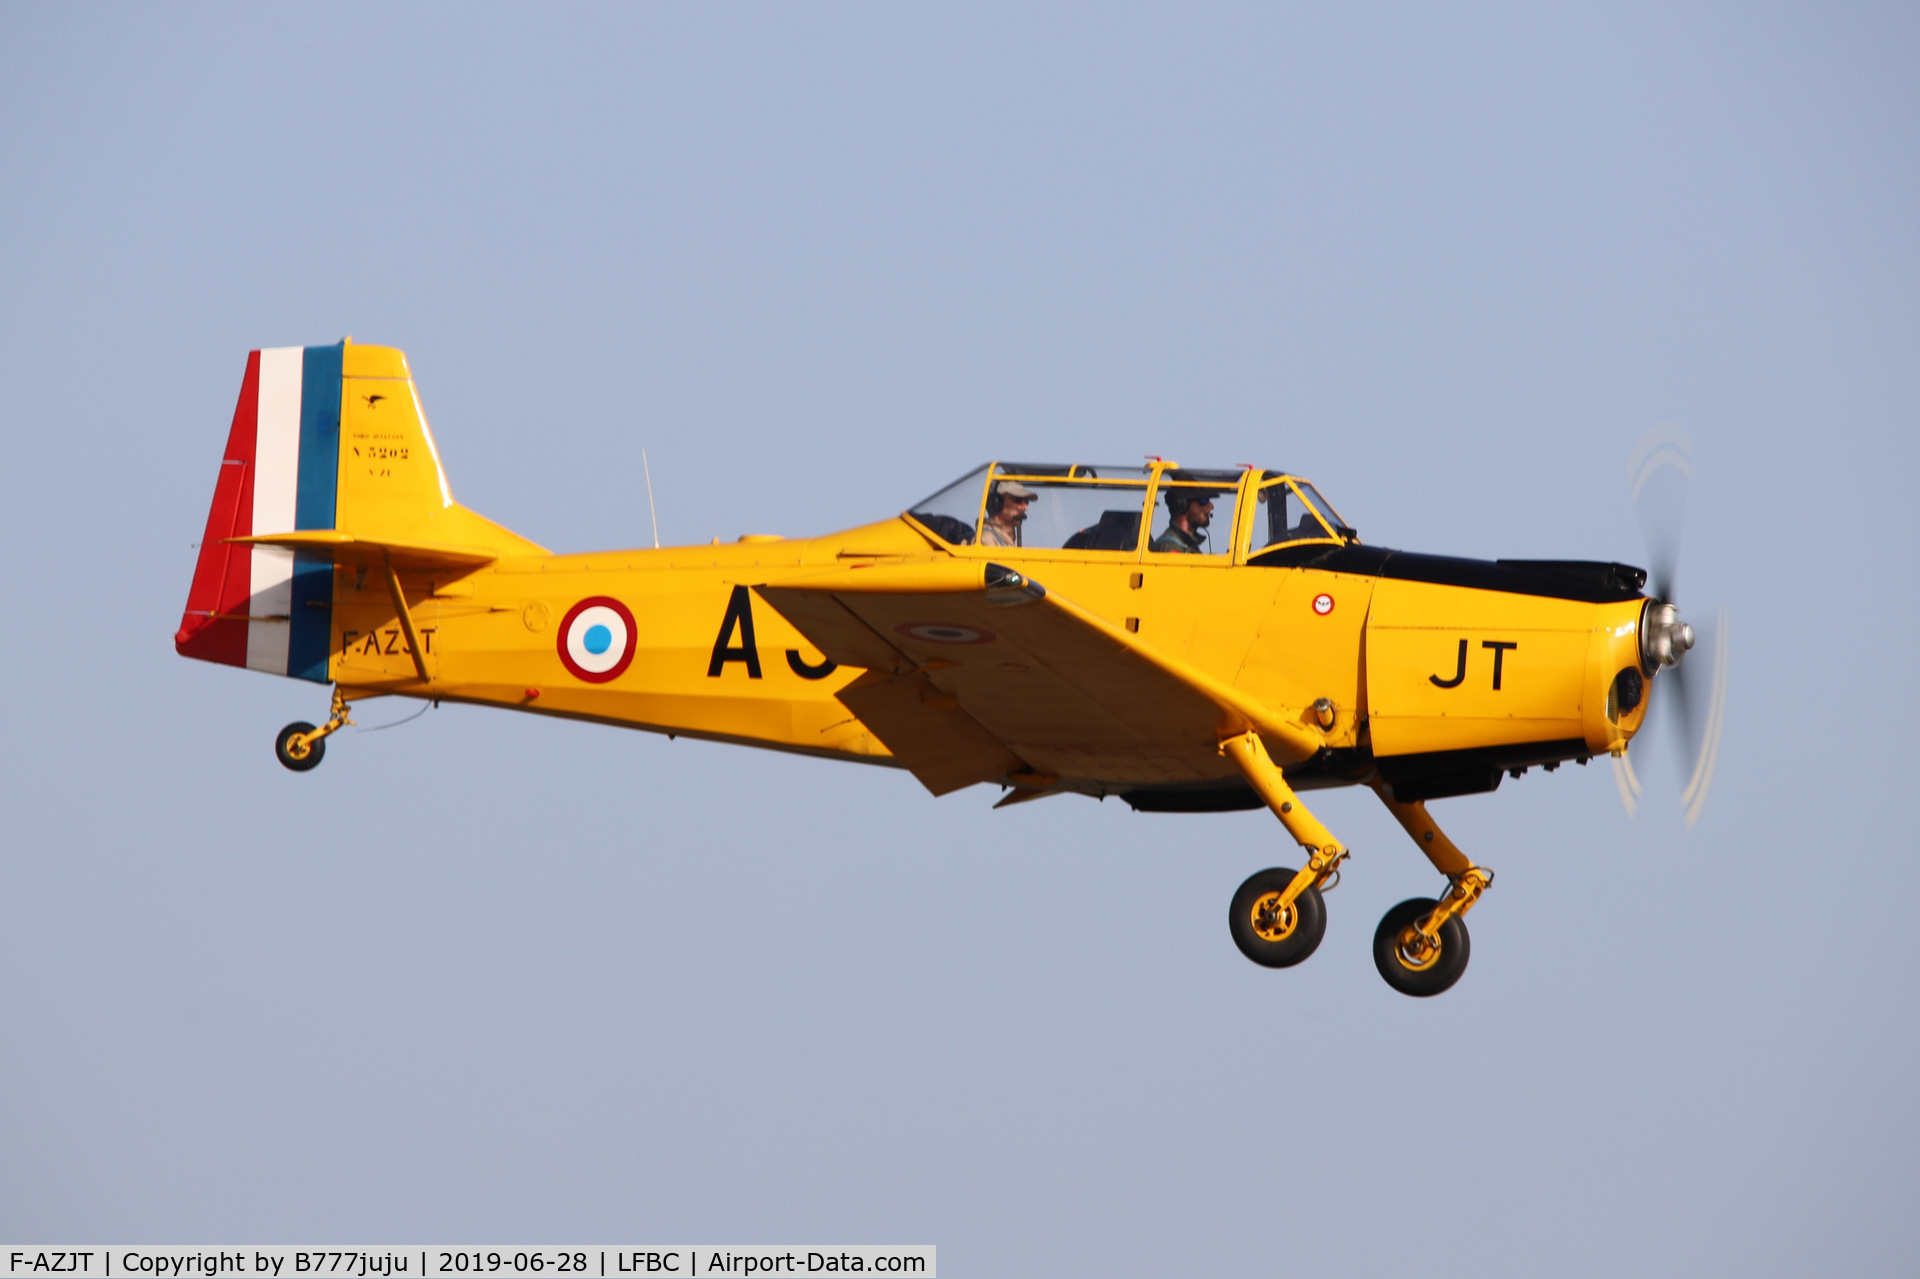 F-AZJT, 1960 Nord 3202 Master C/N 71, at Cazaux airshow